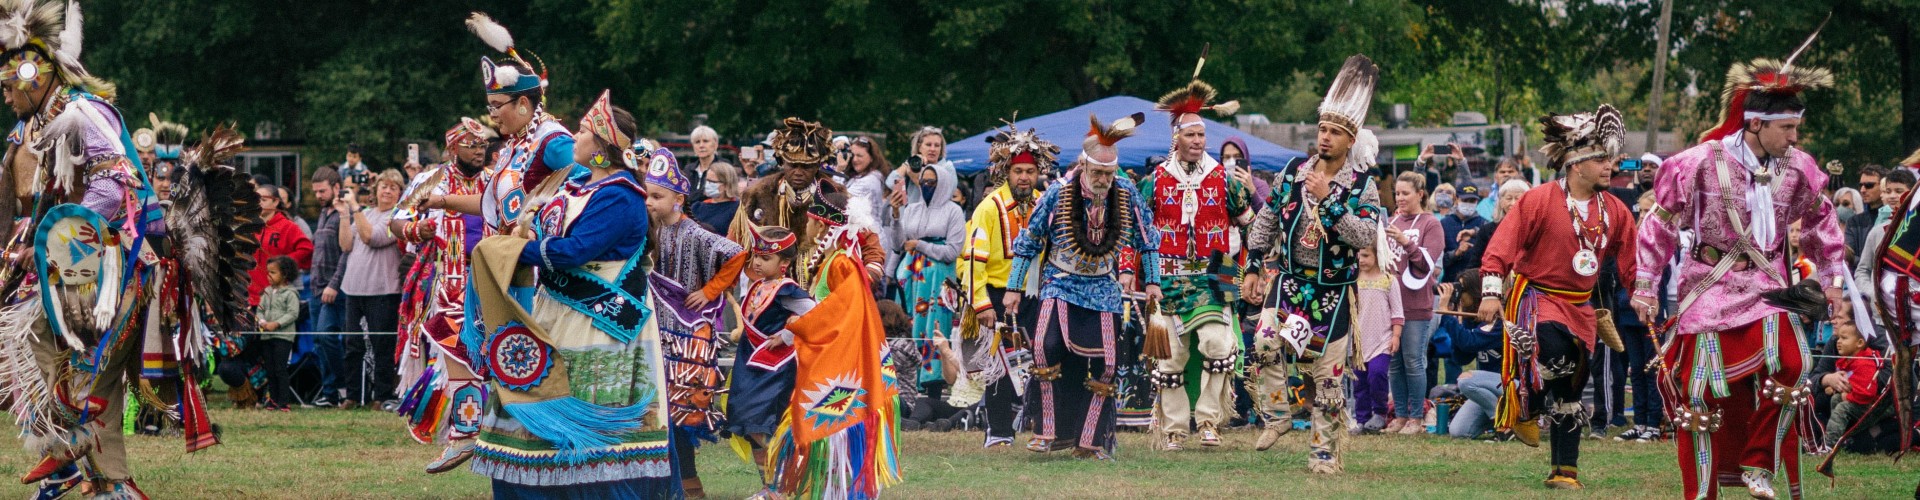 Dancers in the arena at the Inaugural Dix Park Inter Tribal Pow Wow 2021